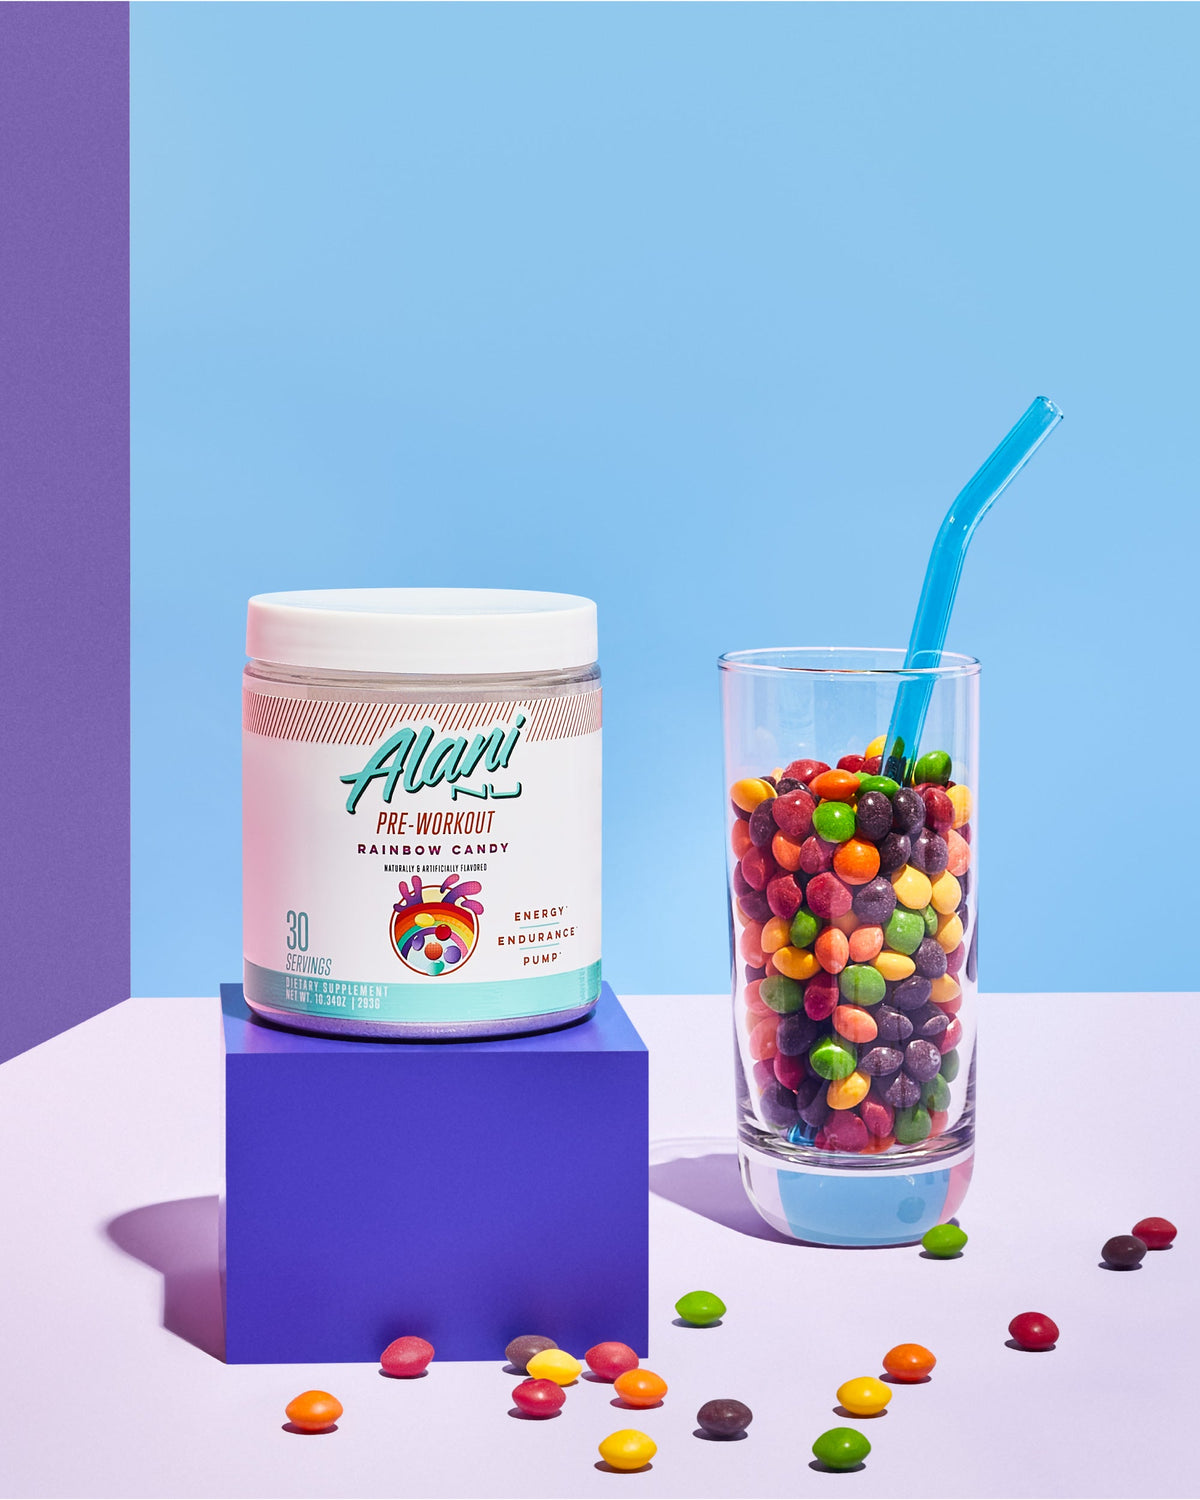 Pre-Workout in Rainbow Candy flavor next to a glass of skitles in glass.